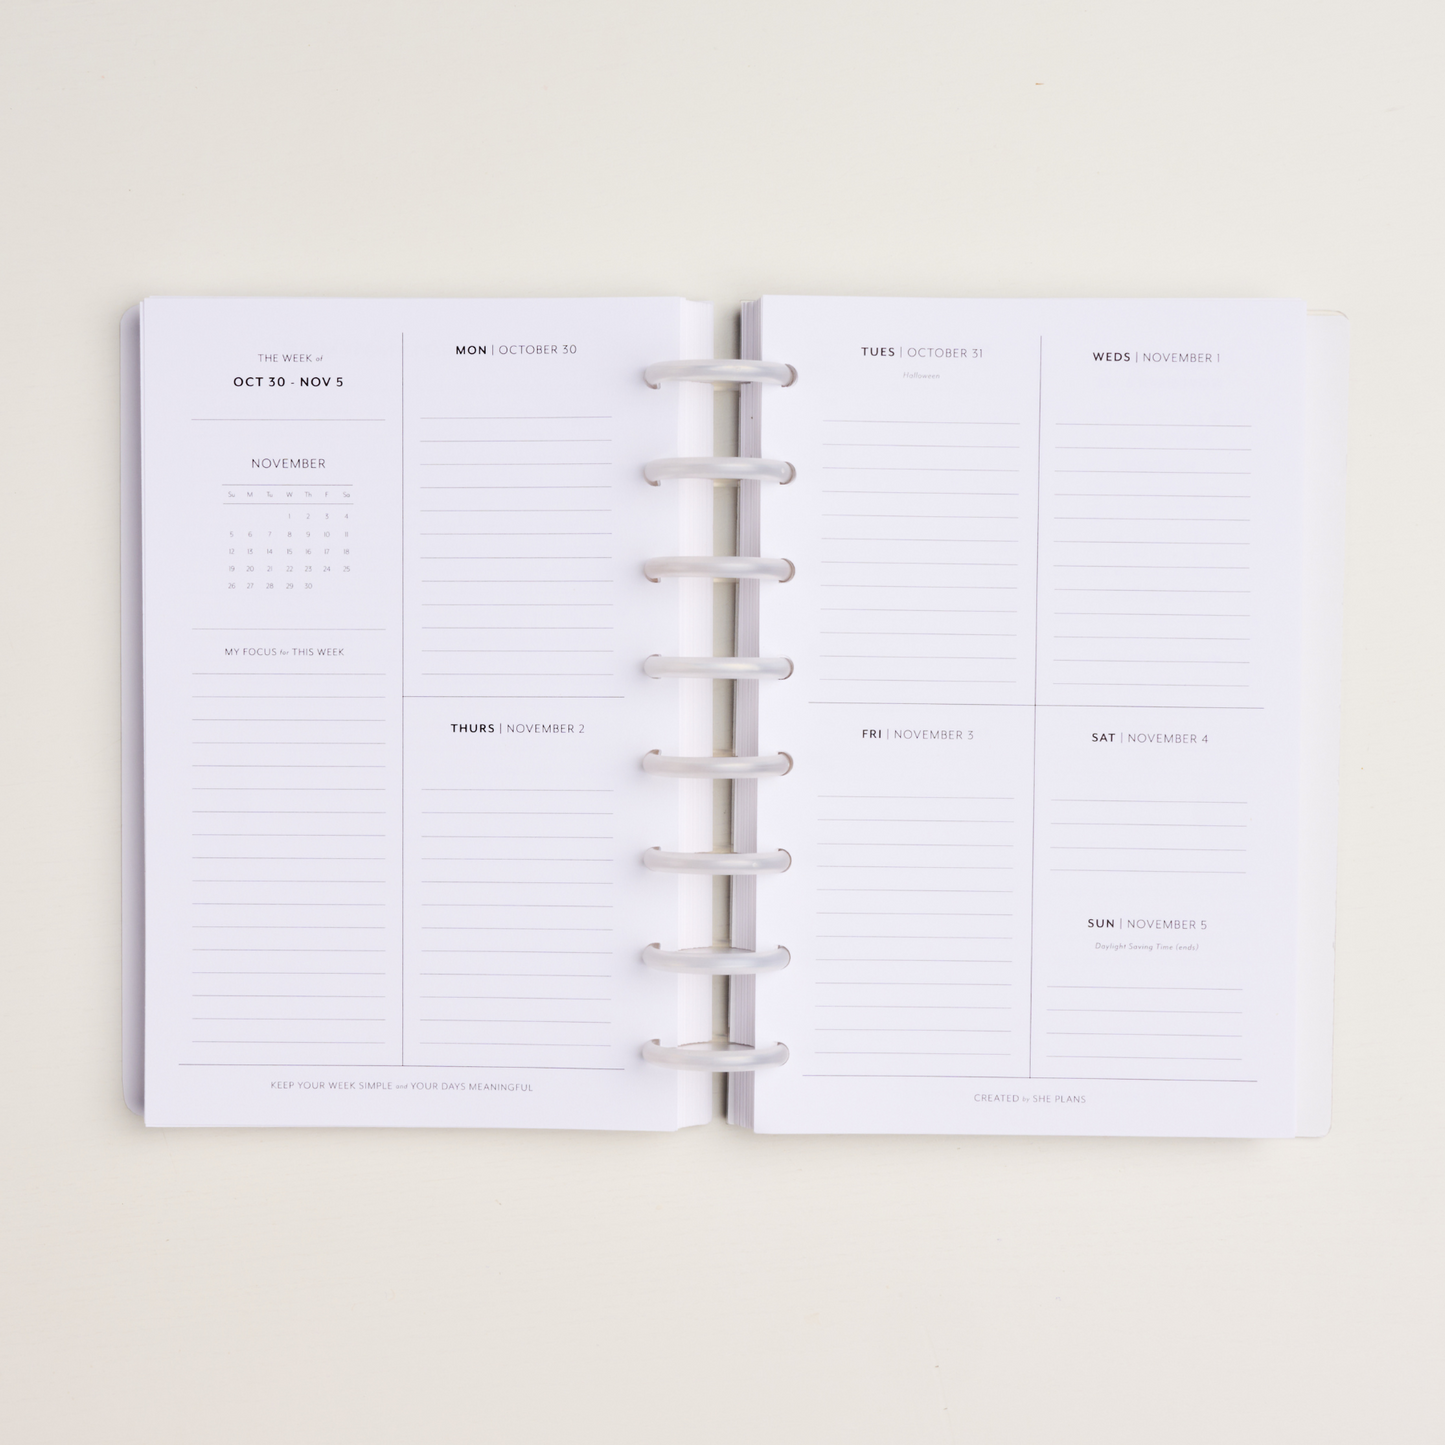 2024 Dated Planner Inserts, Daily